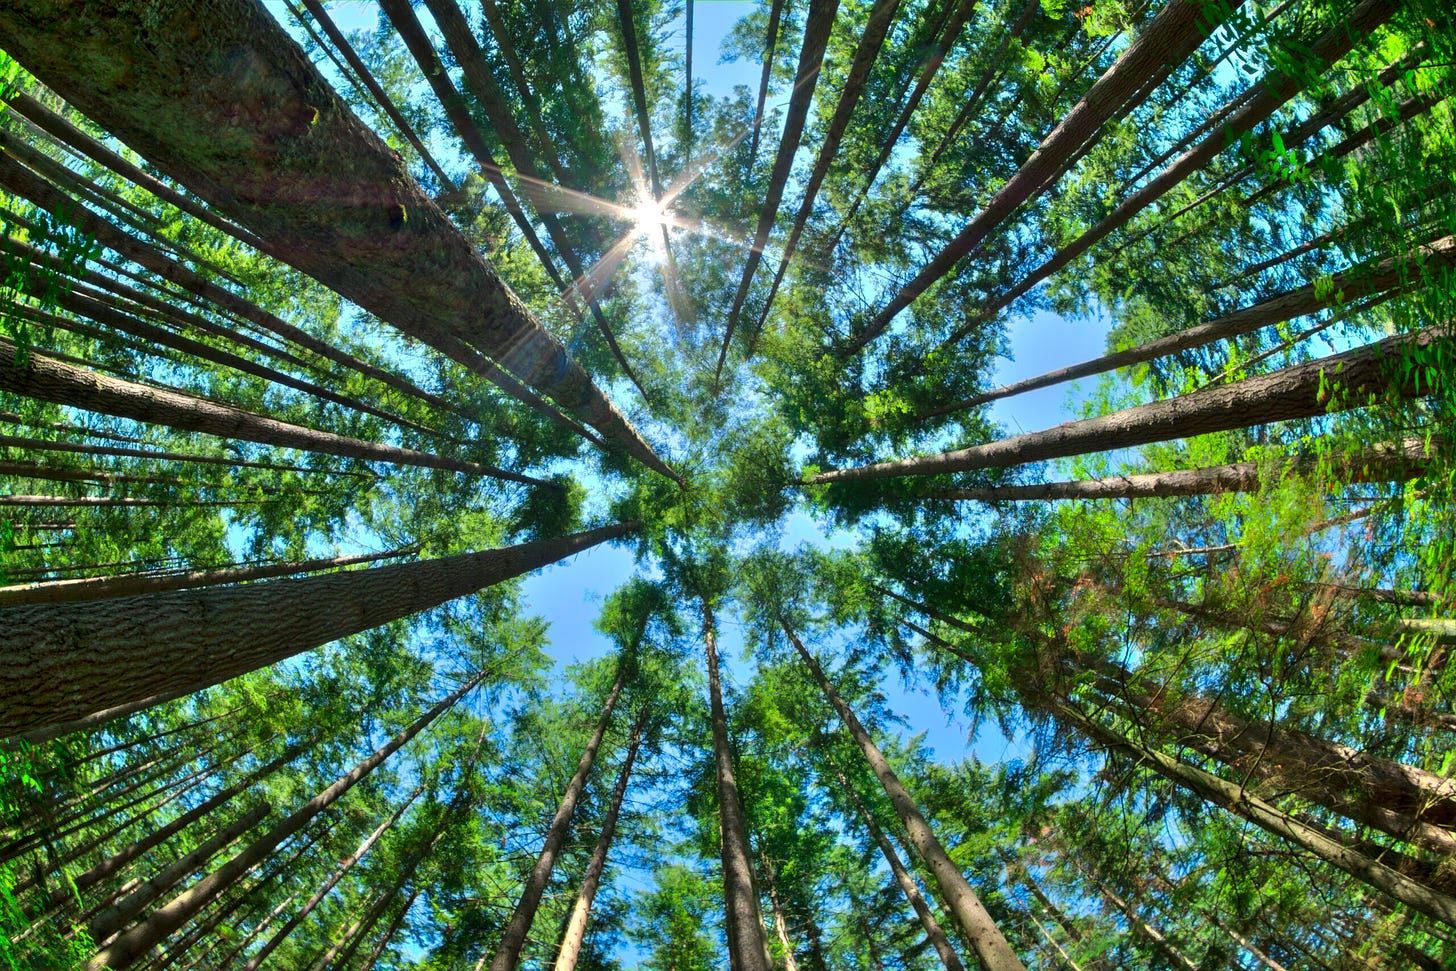 Why Don't Trees Grow To The Sky? - Cardinal Capital Management